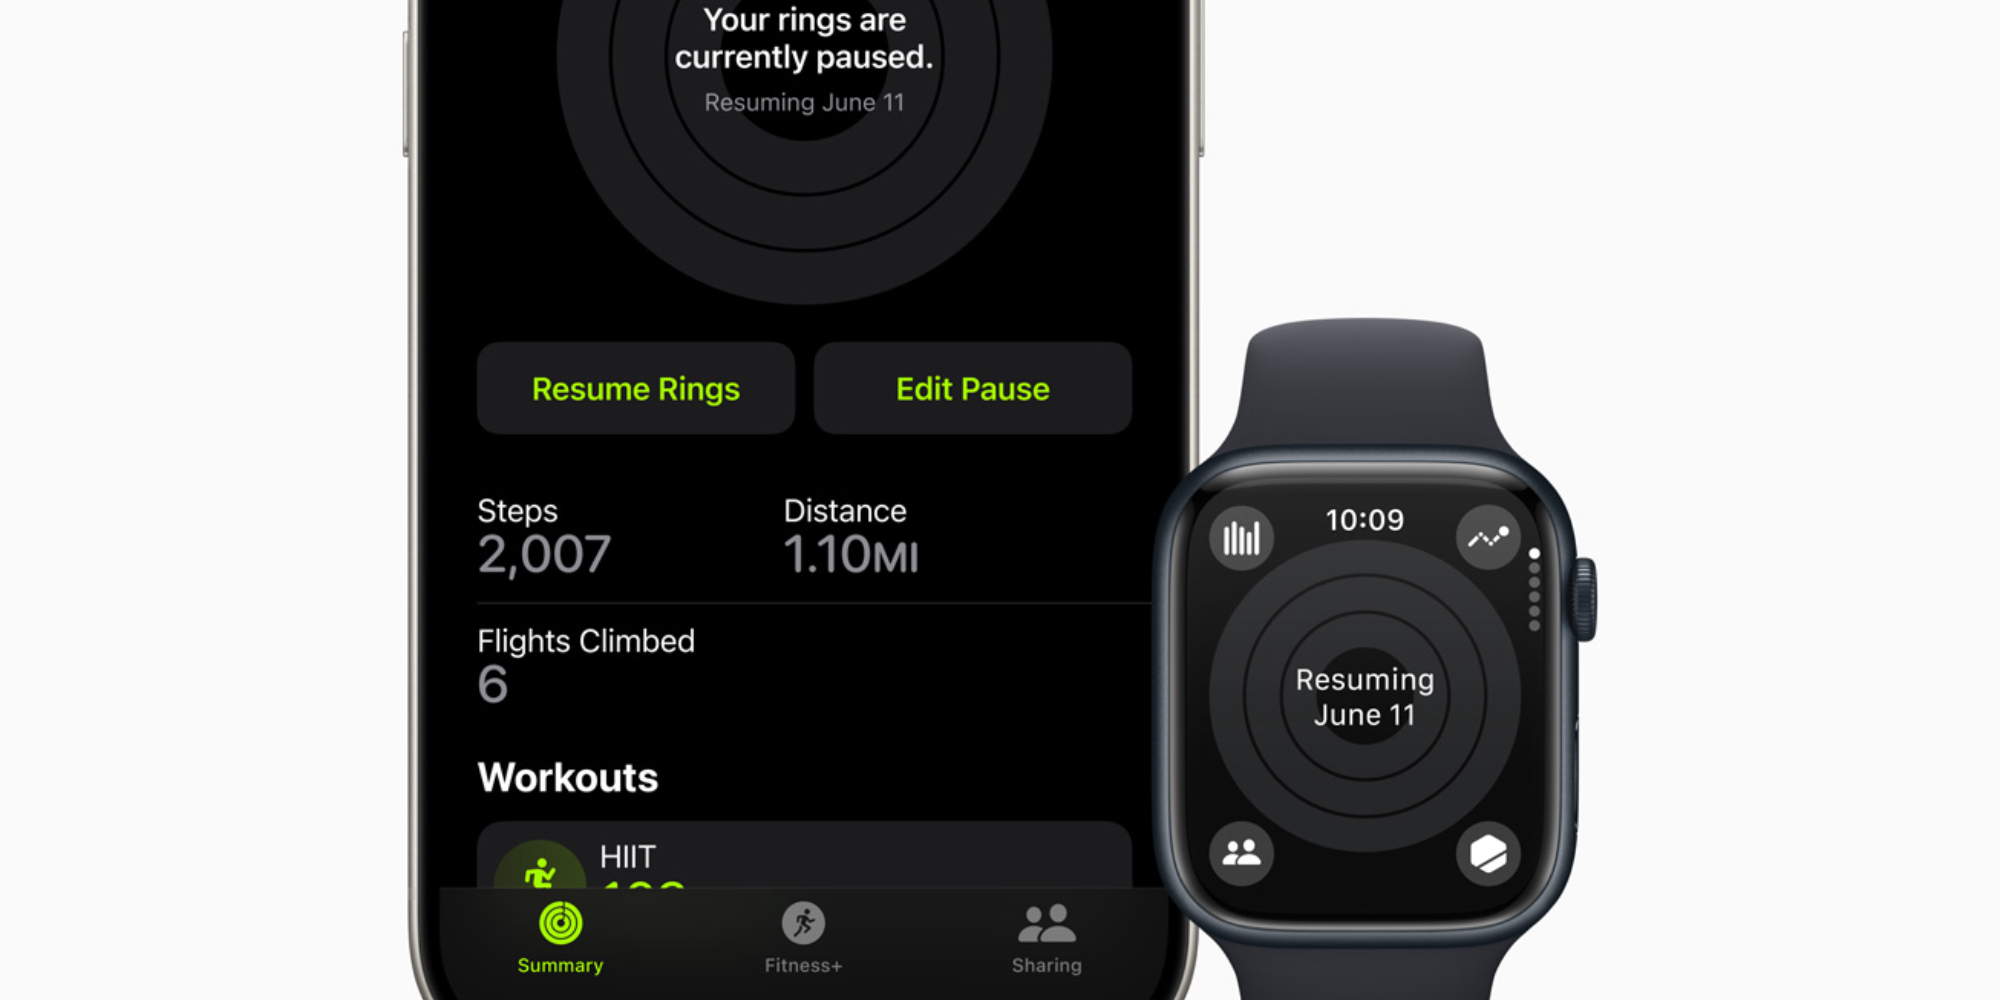 Apple Watch paused rings in the Activity app